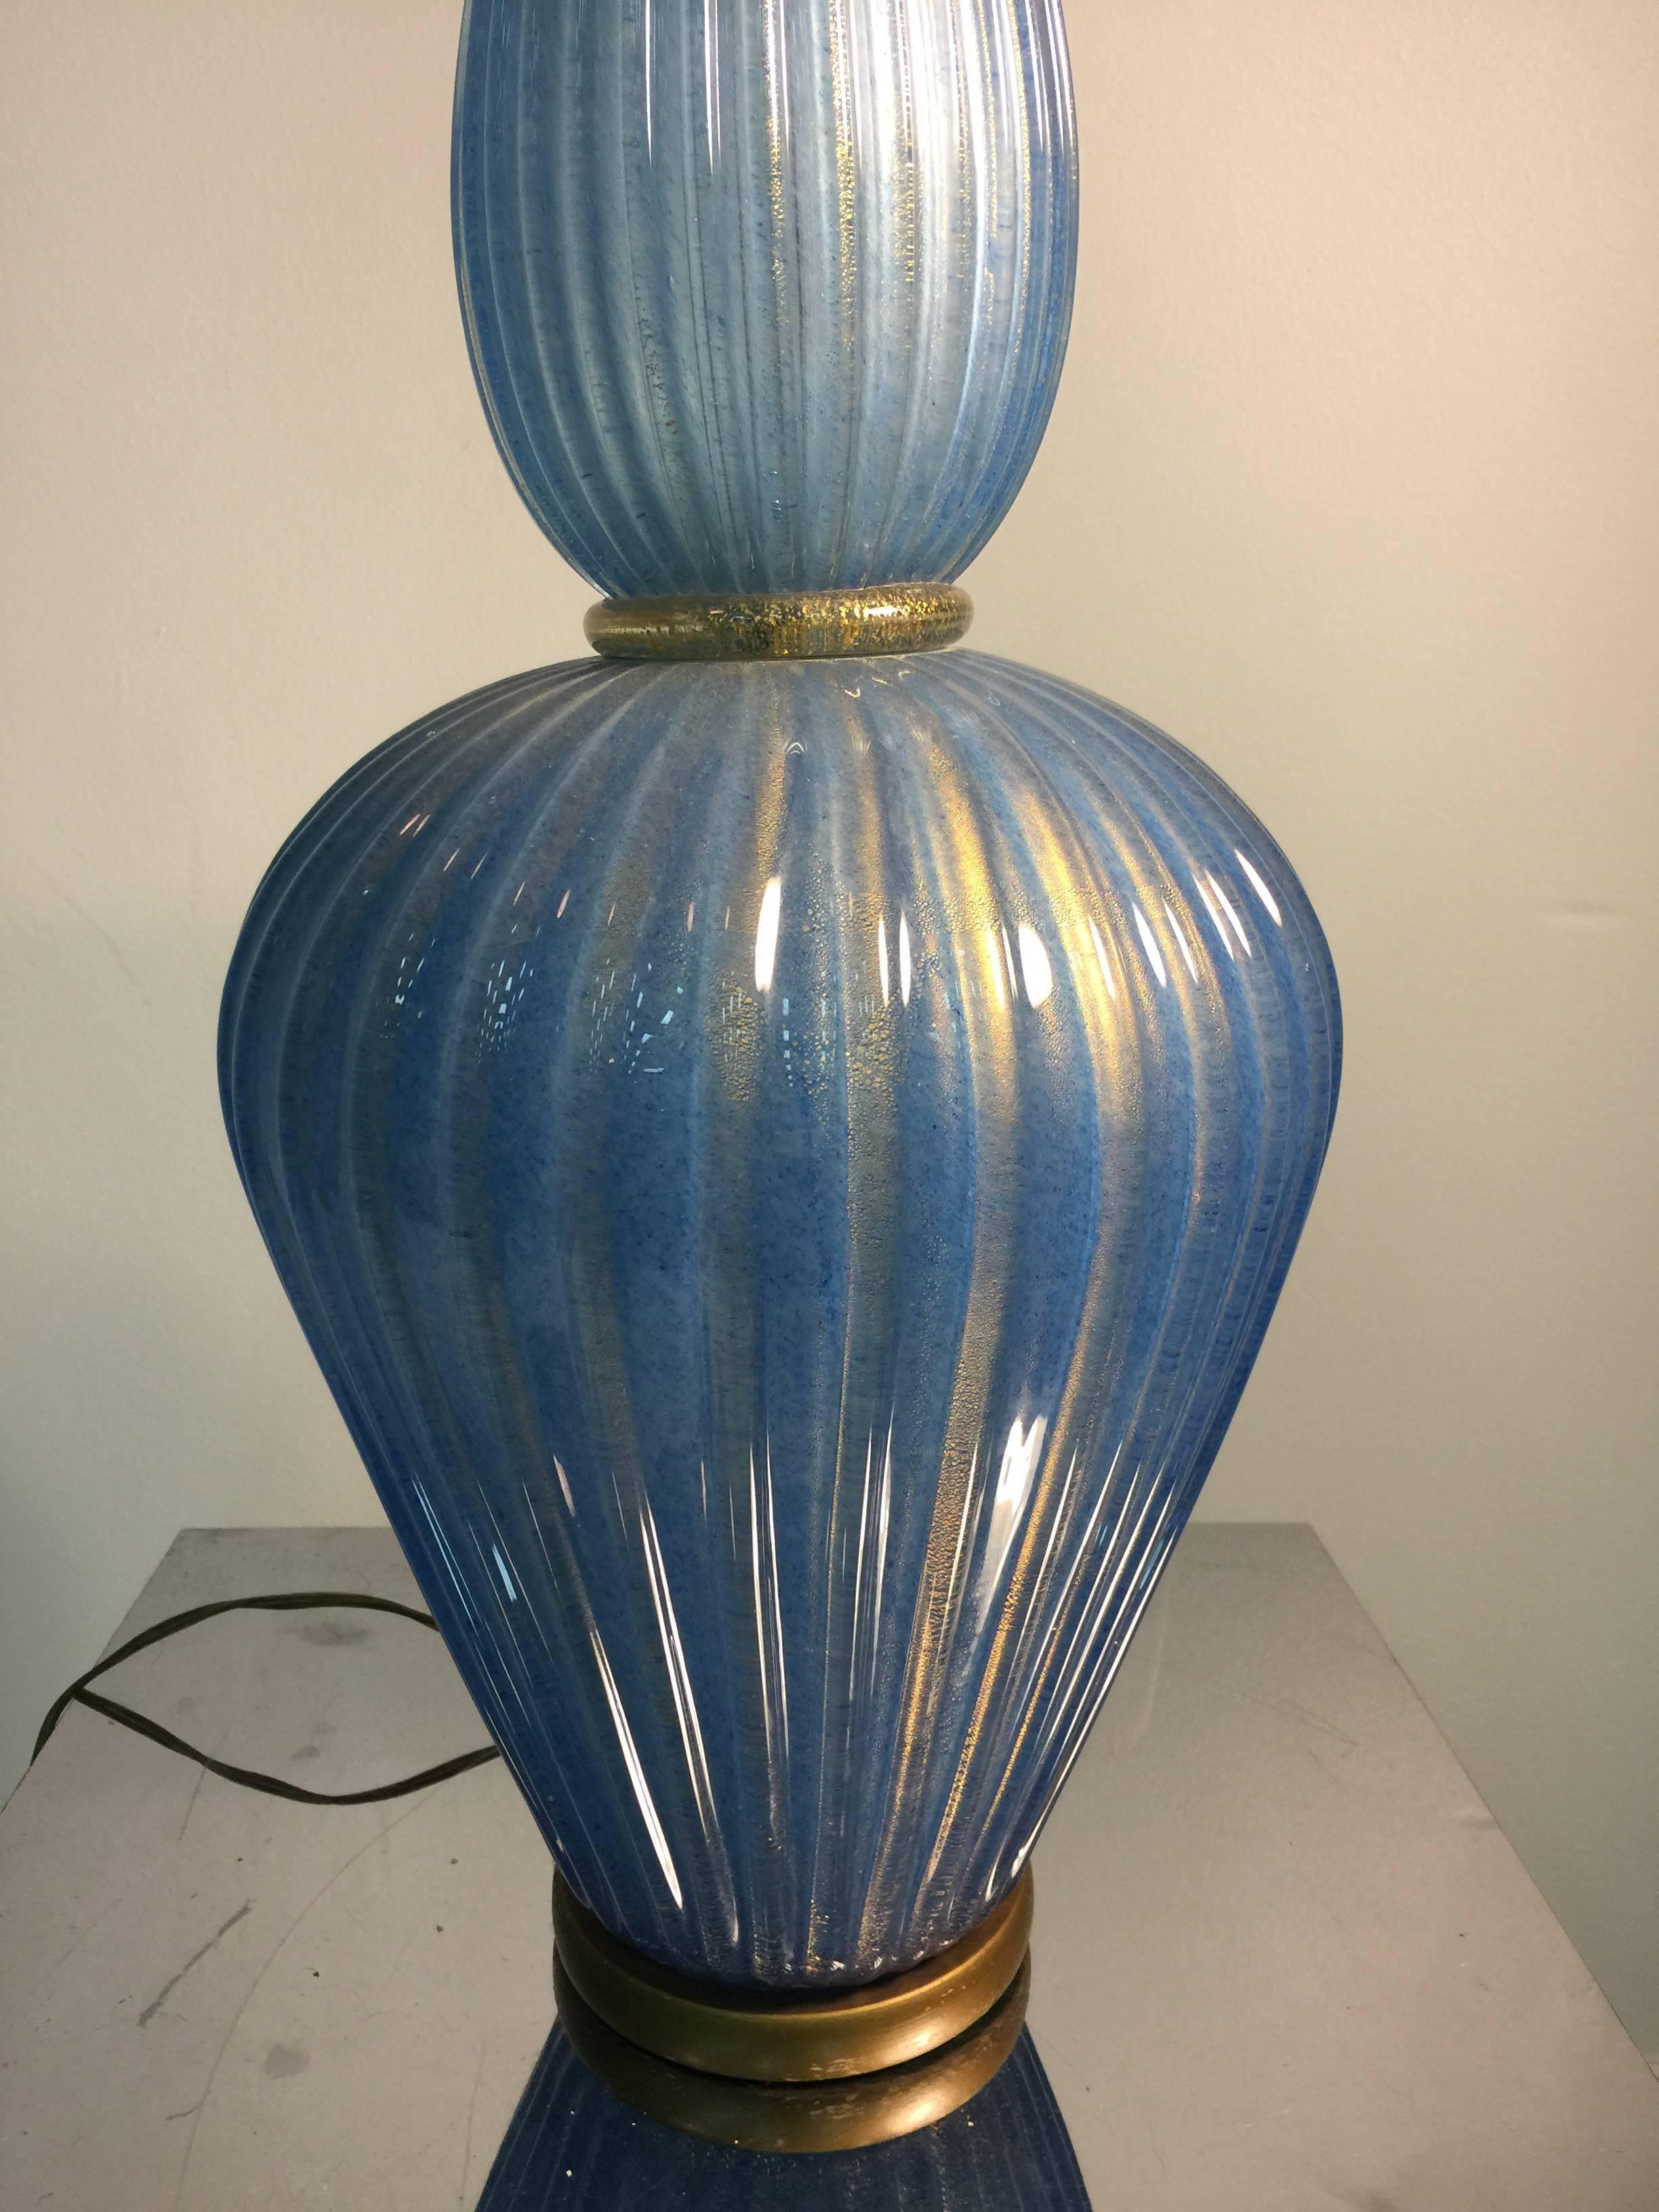 A Midcentury Italian giant decorator table lamp in blue Murano glass with gold flakes by Barovier, circa 1960.